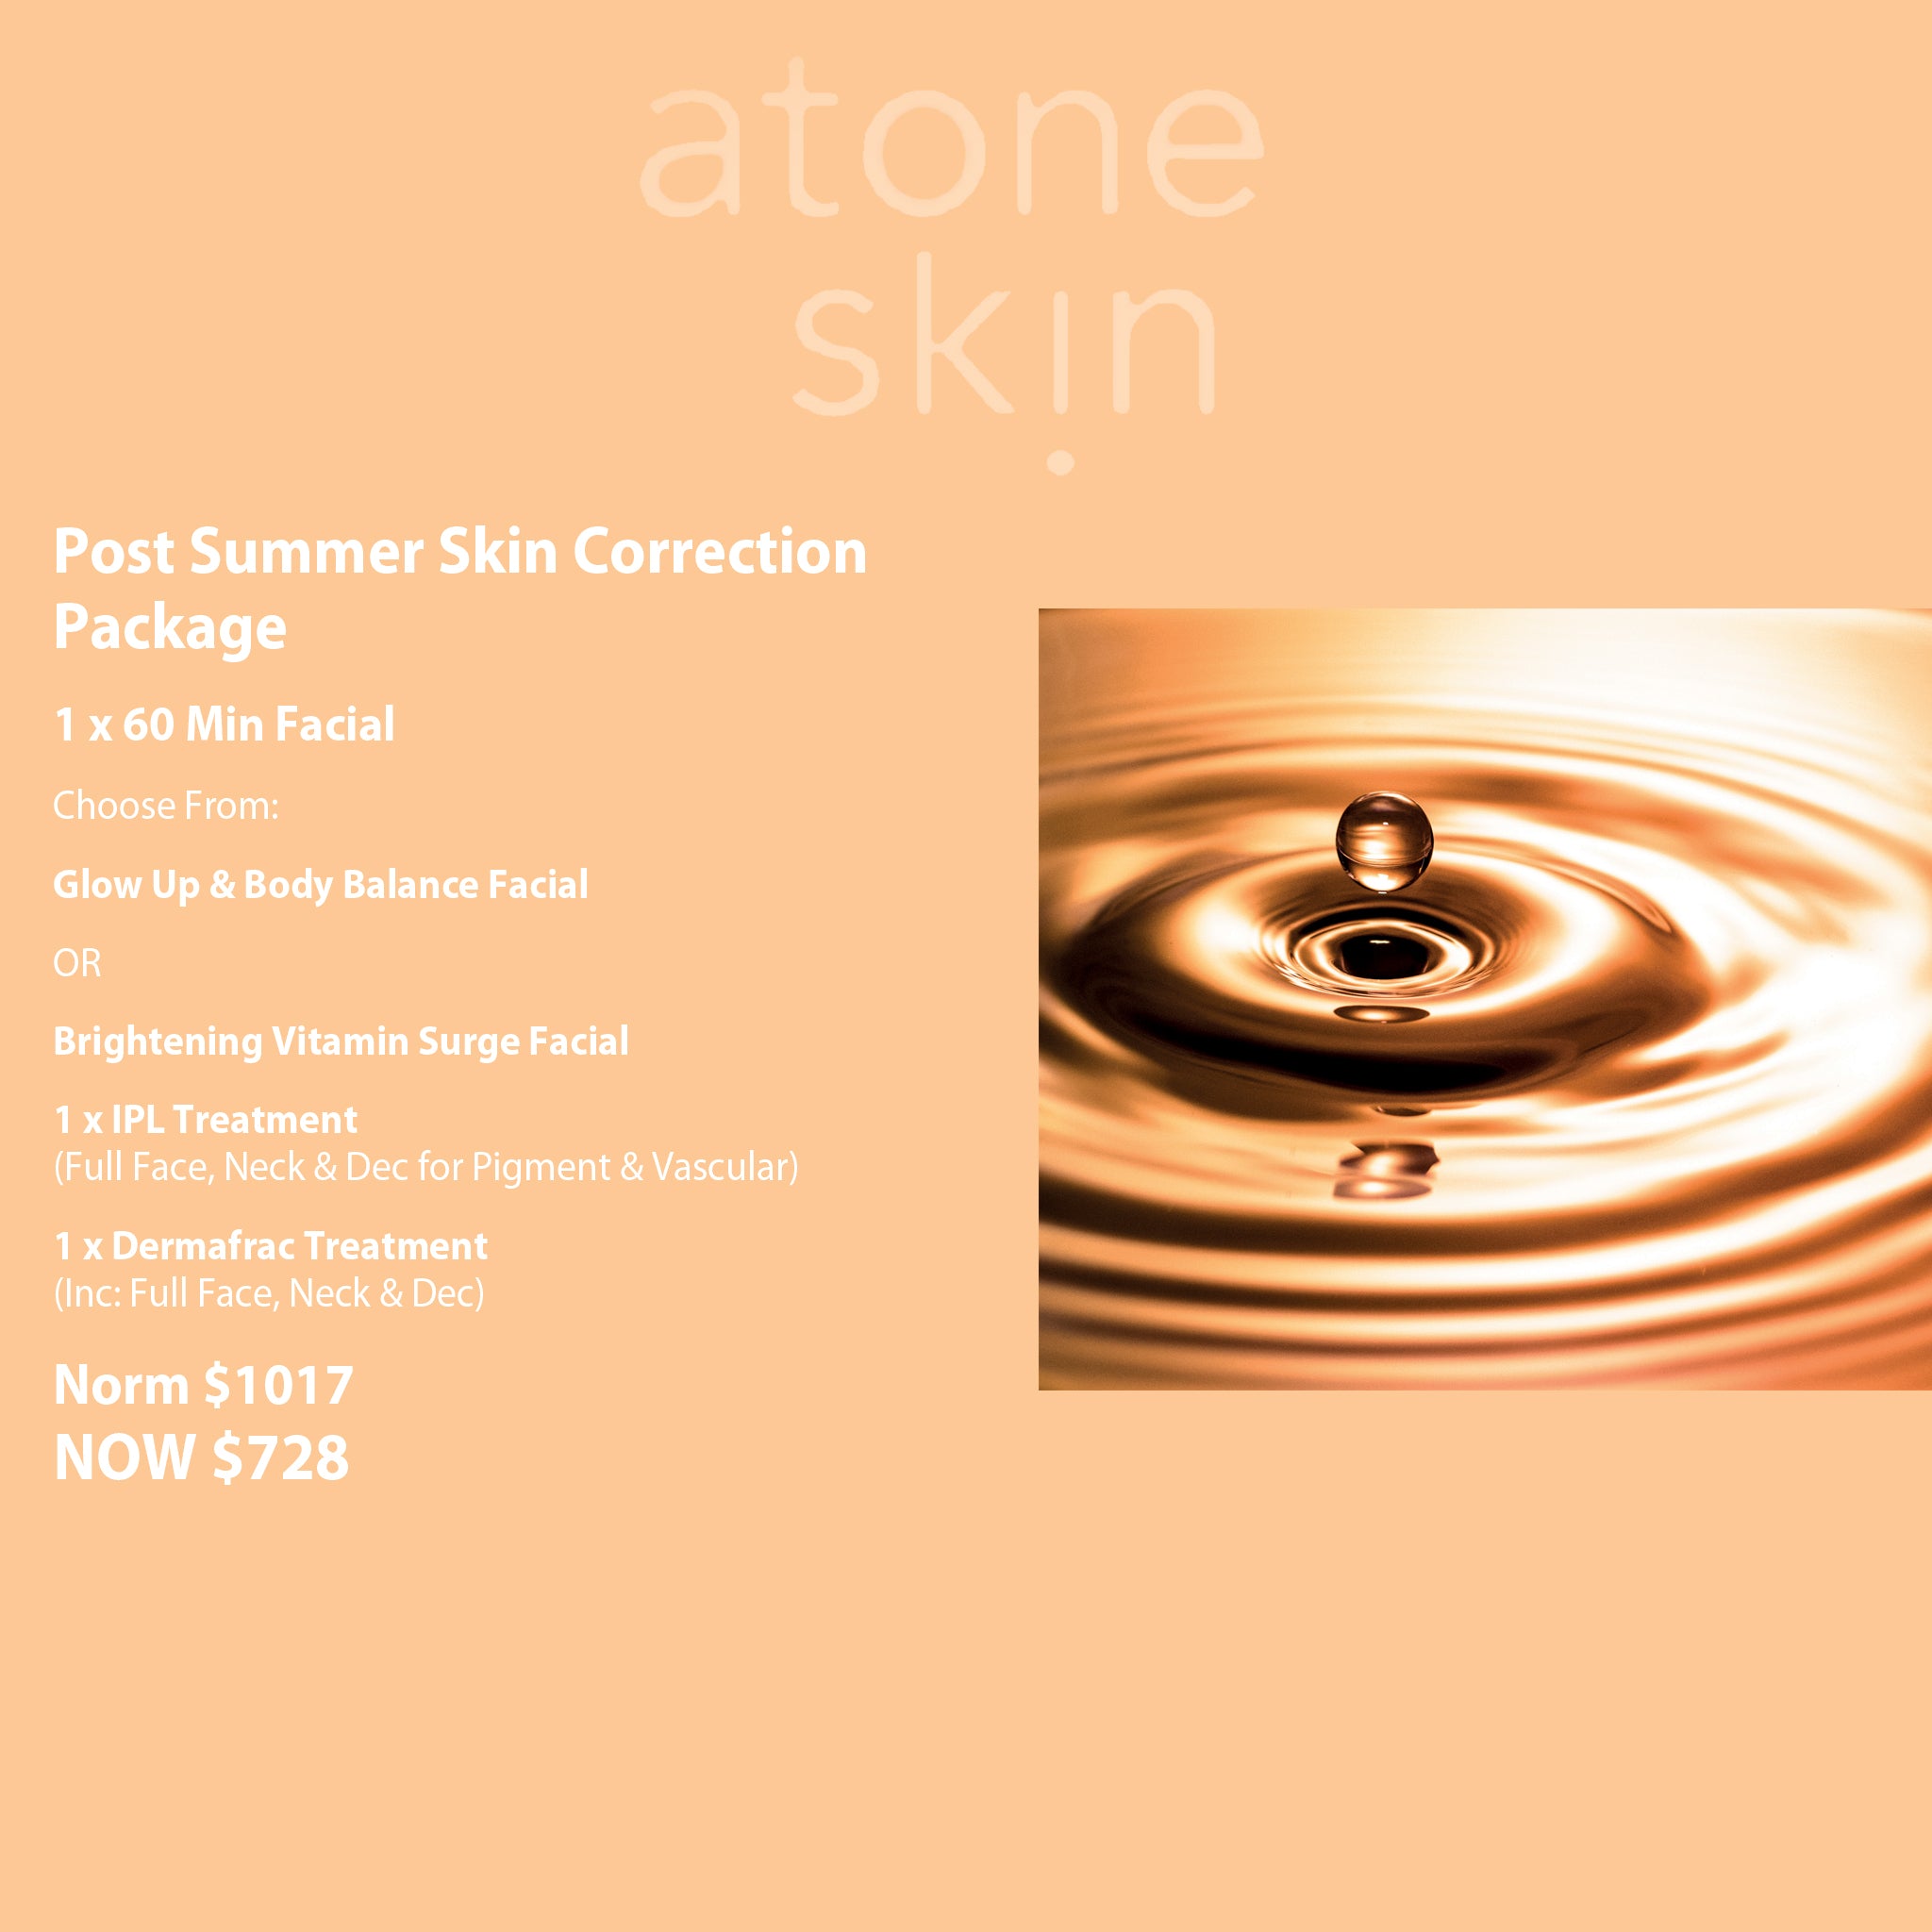 Post Summer Skin Correction Package